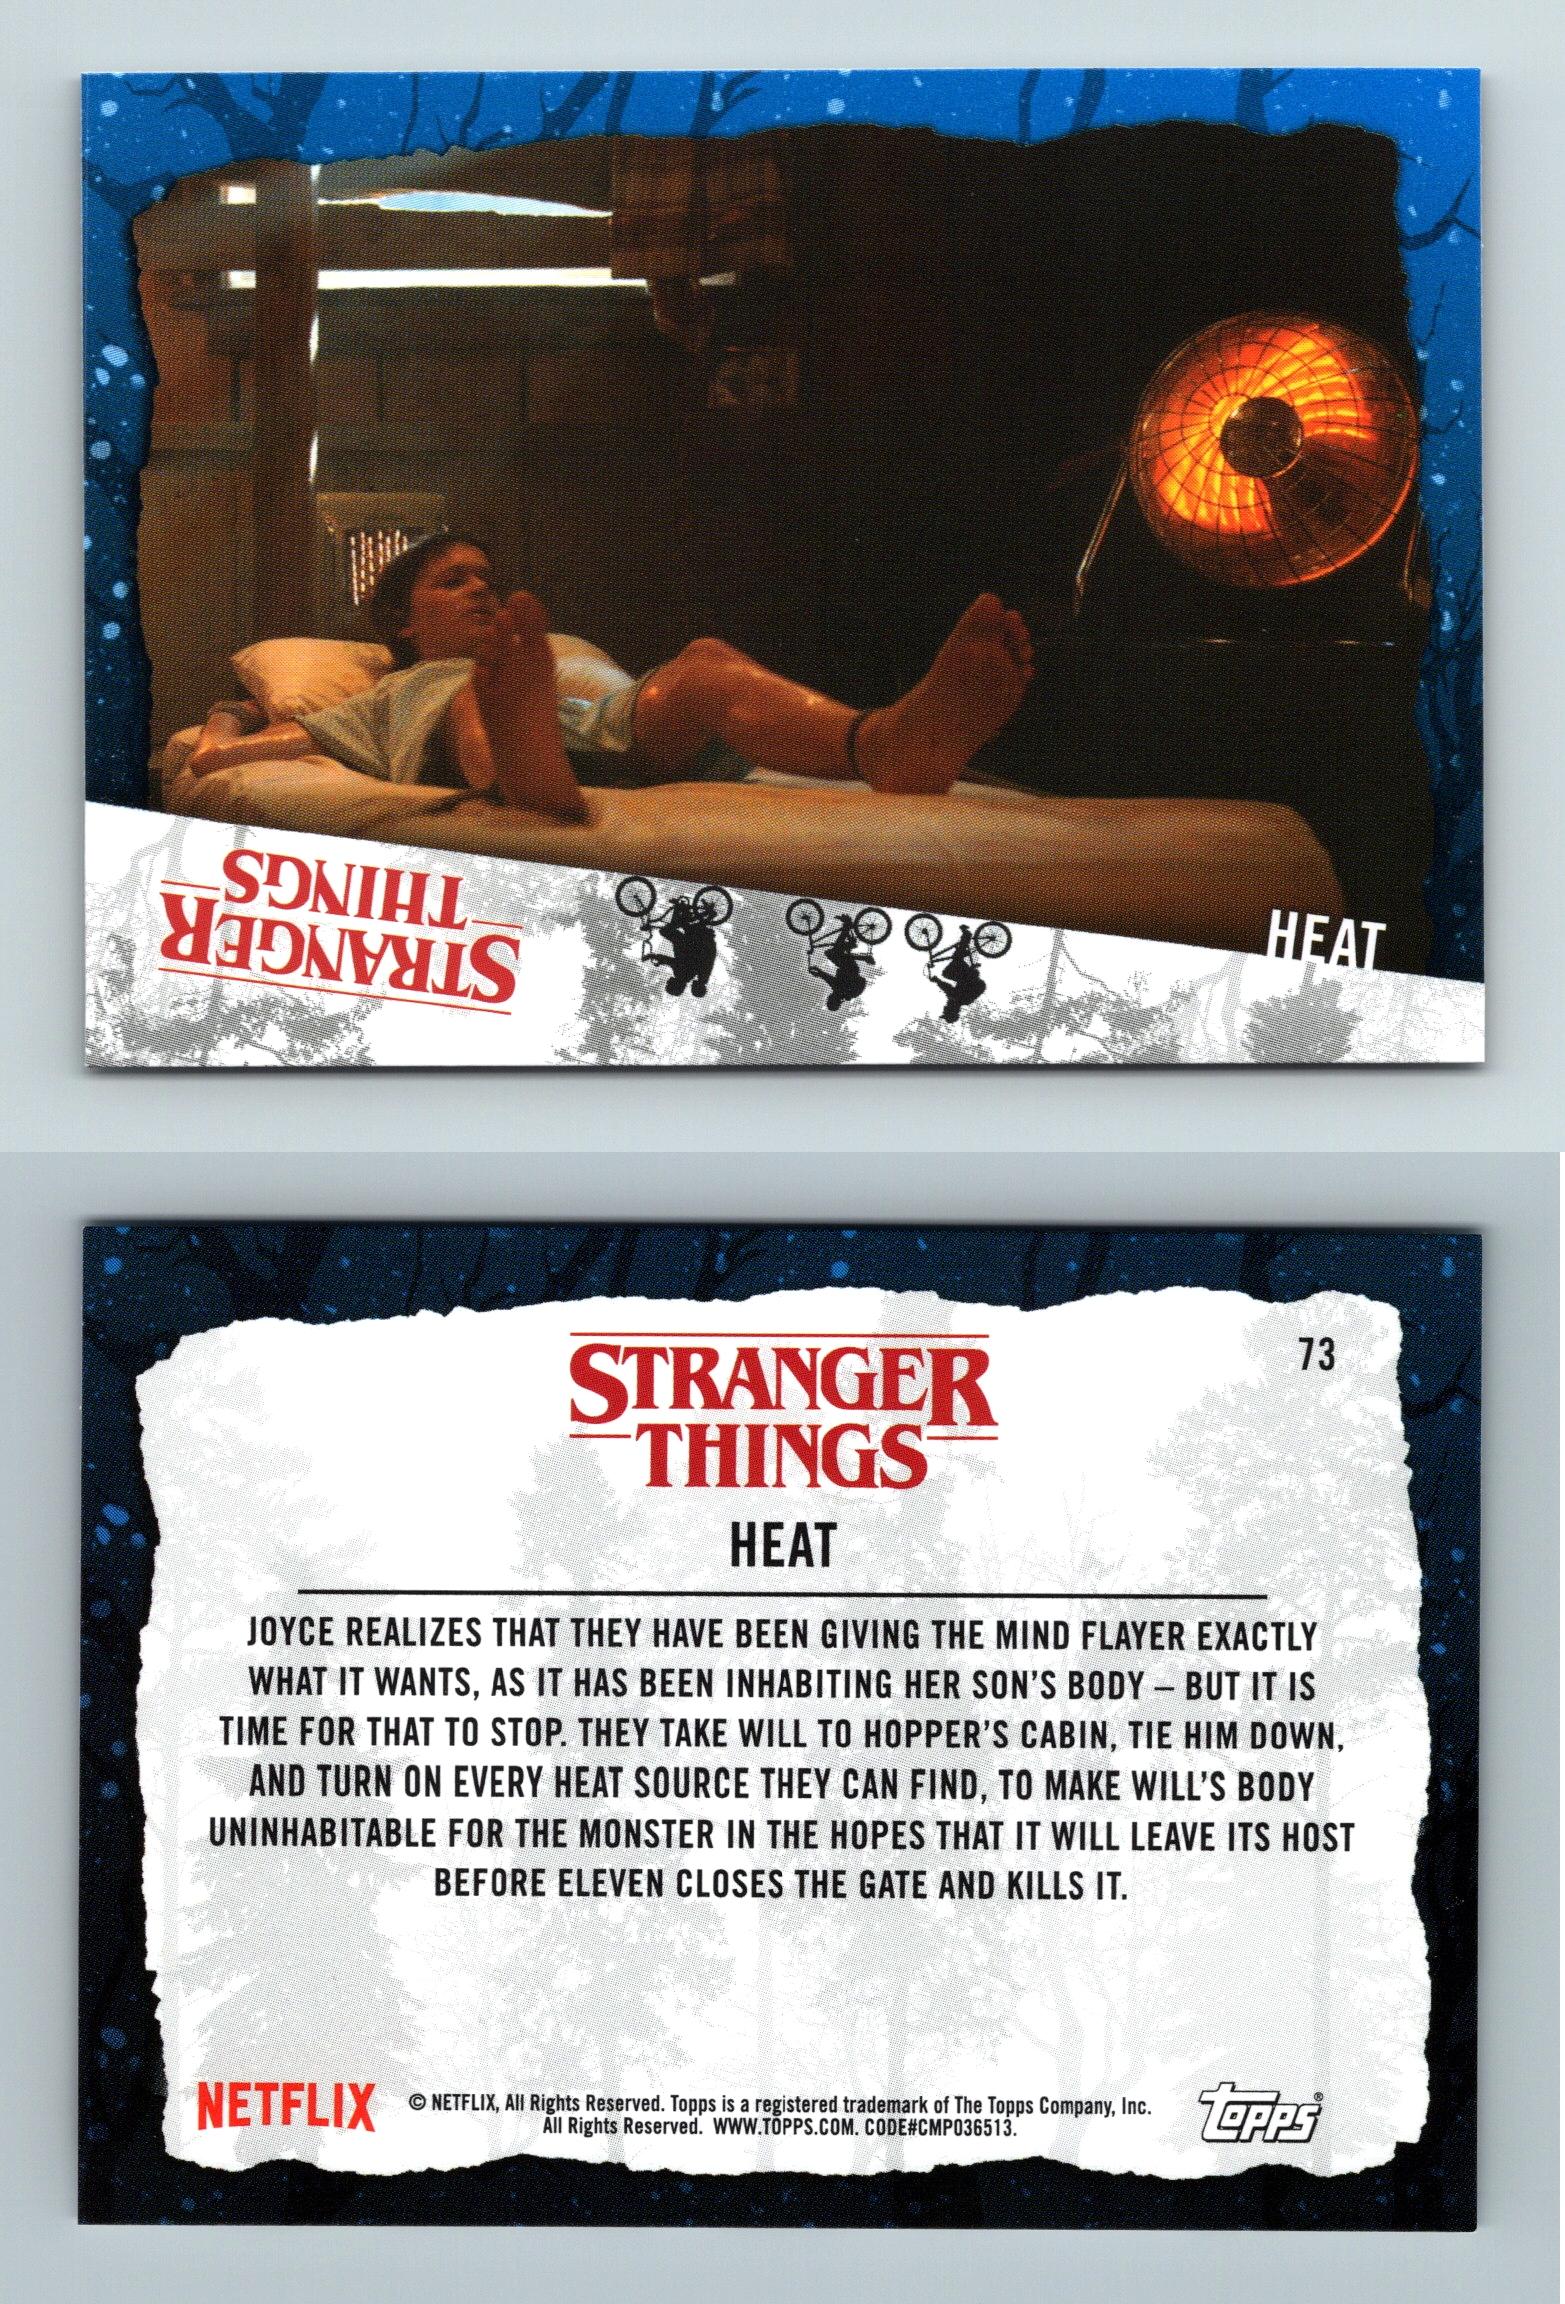 Stranger Things Welcome To The Upside Down CHARACTER Insert #9 / BARBARA  HOLLAND